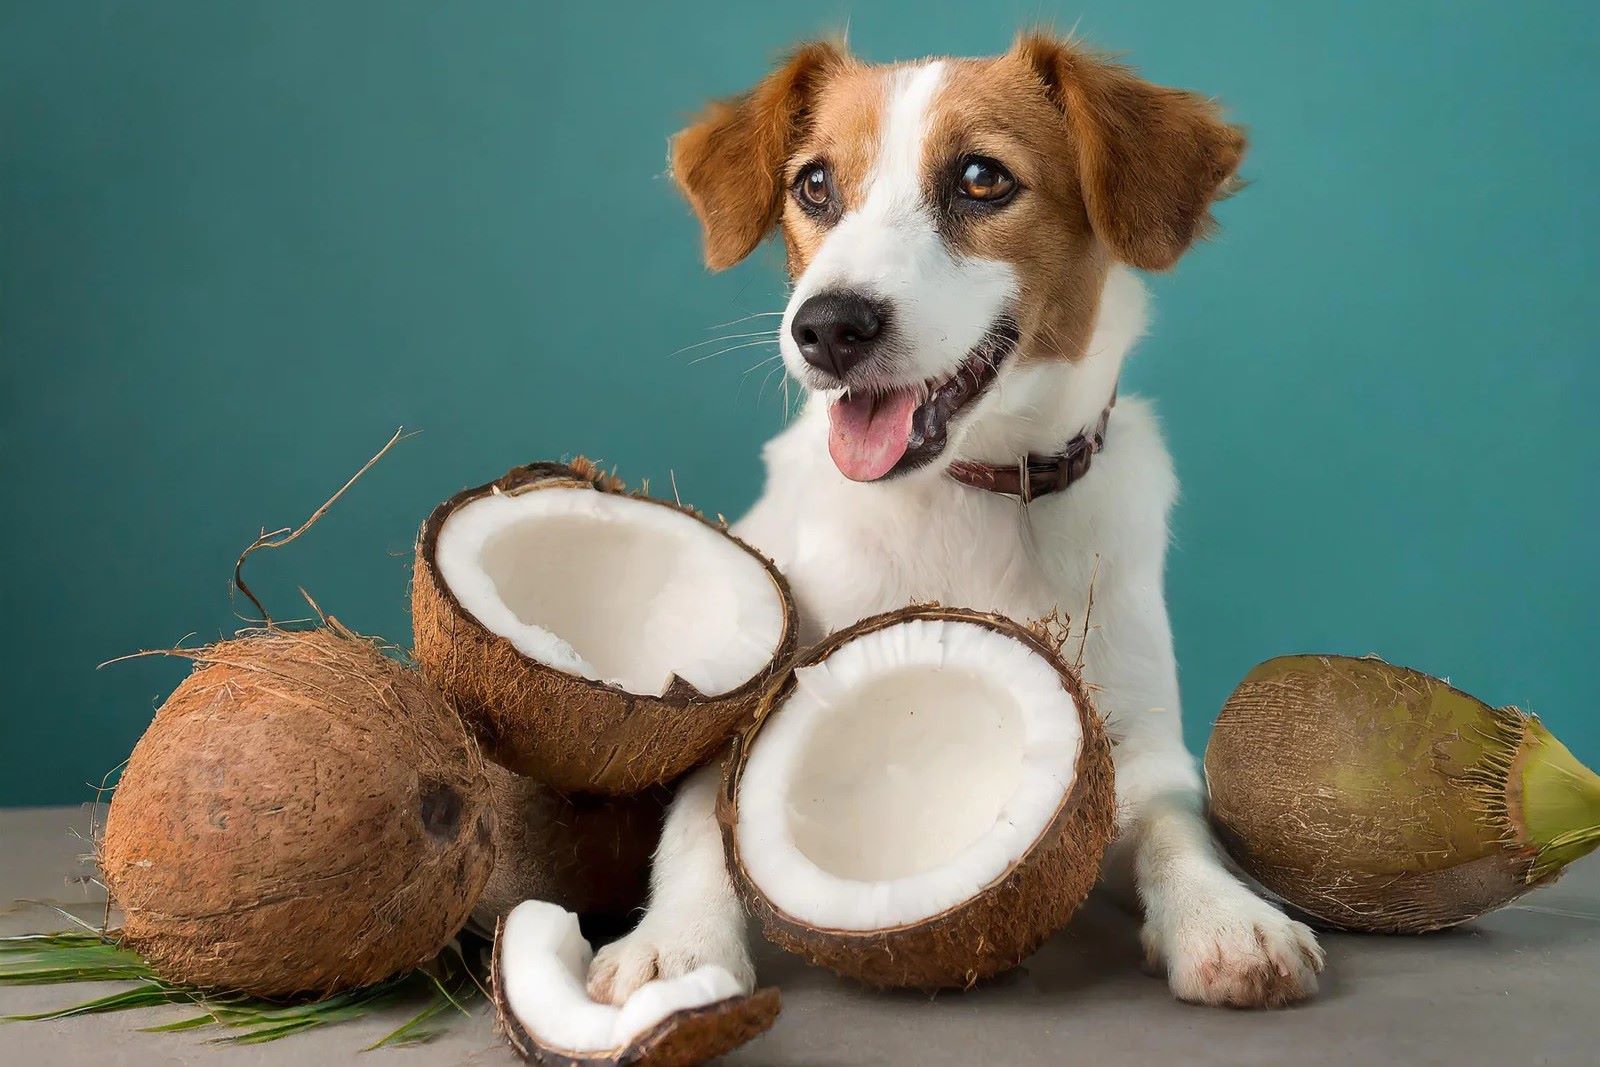 Surprising Truth: Dogs And Coconut - A Perfect Match!